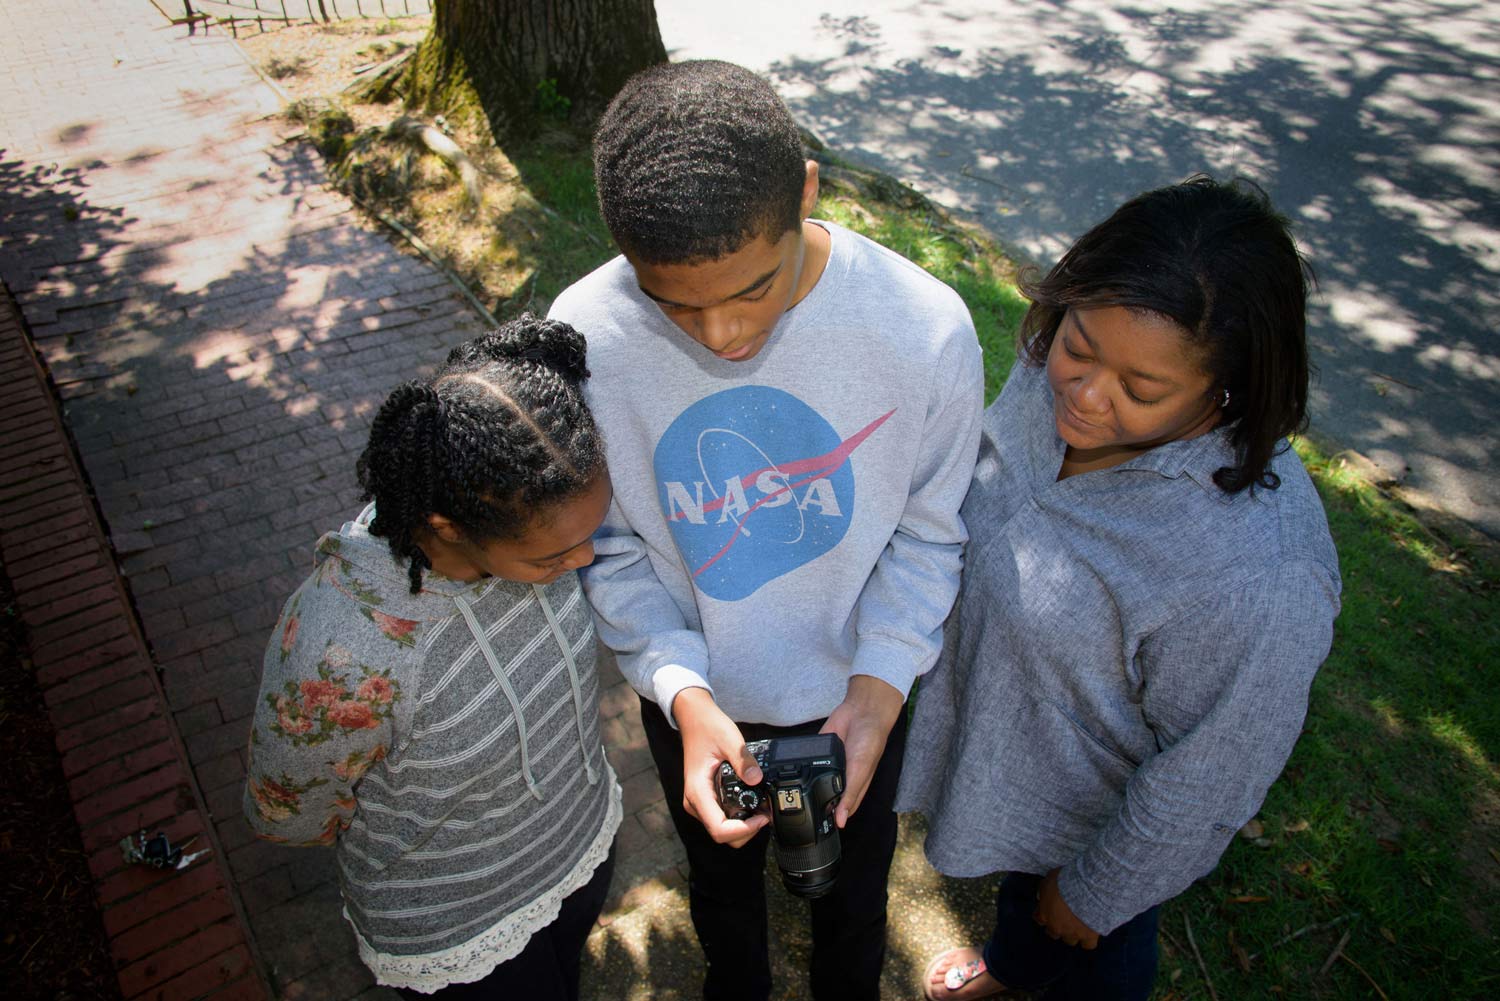 Overhead shot of a young boy holding a camera standing between two women. 